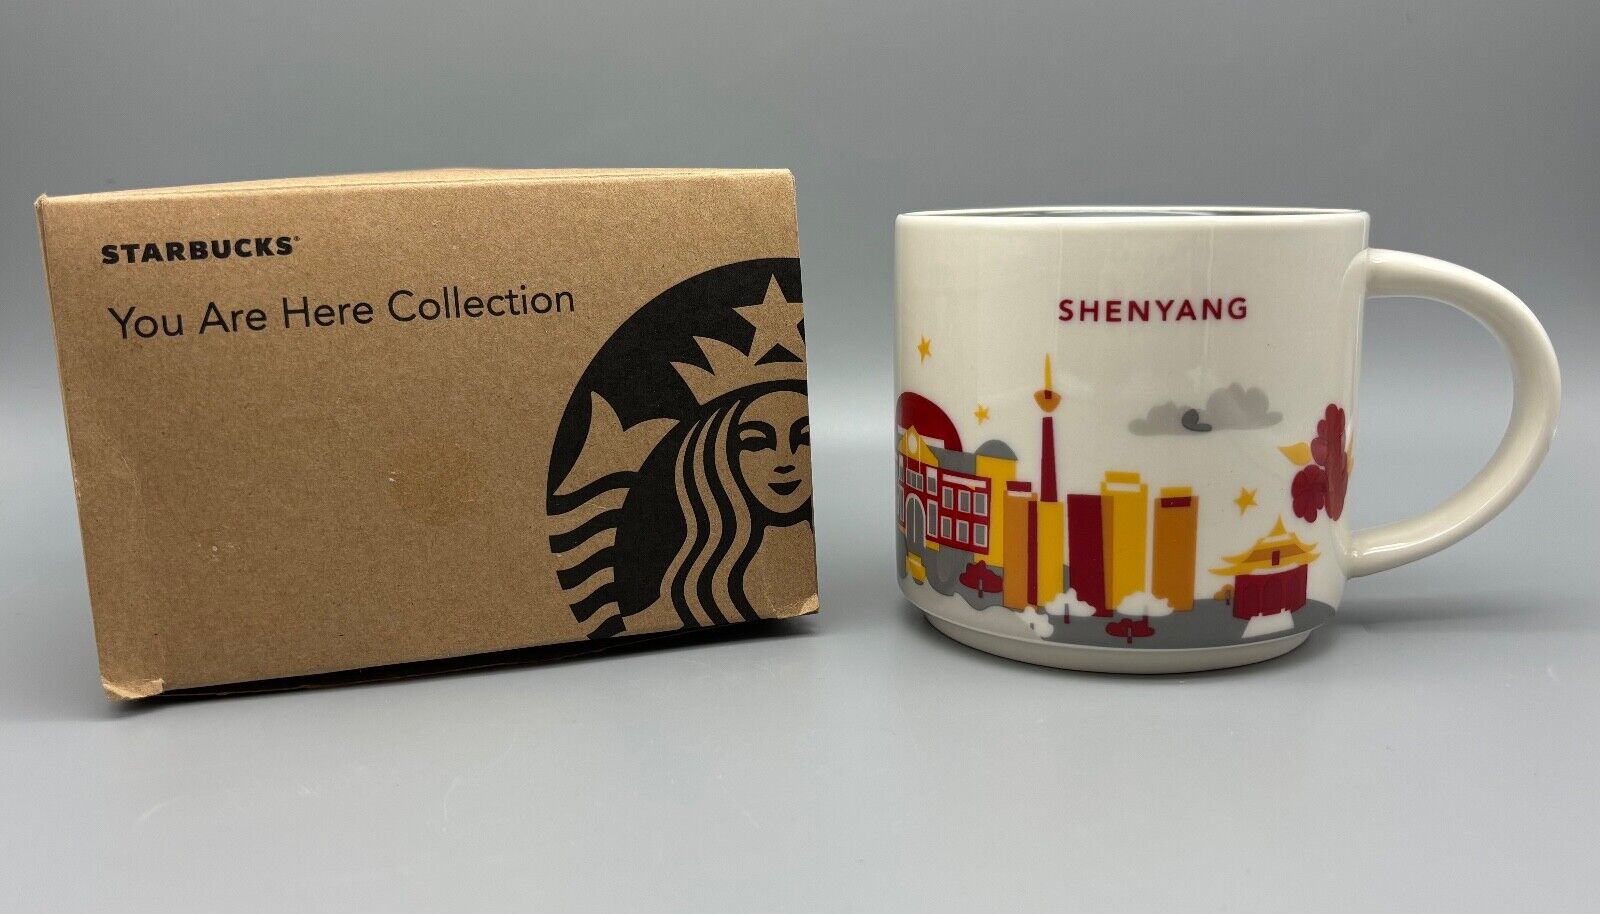 Starbucks You Are Here Collection SHENYANG 14 fl oz Mug - NEW IN BOX